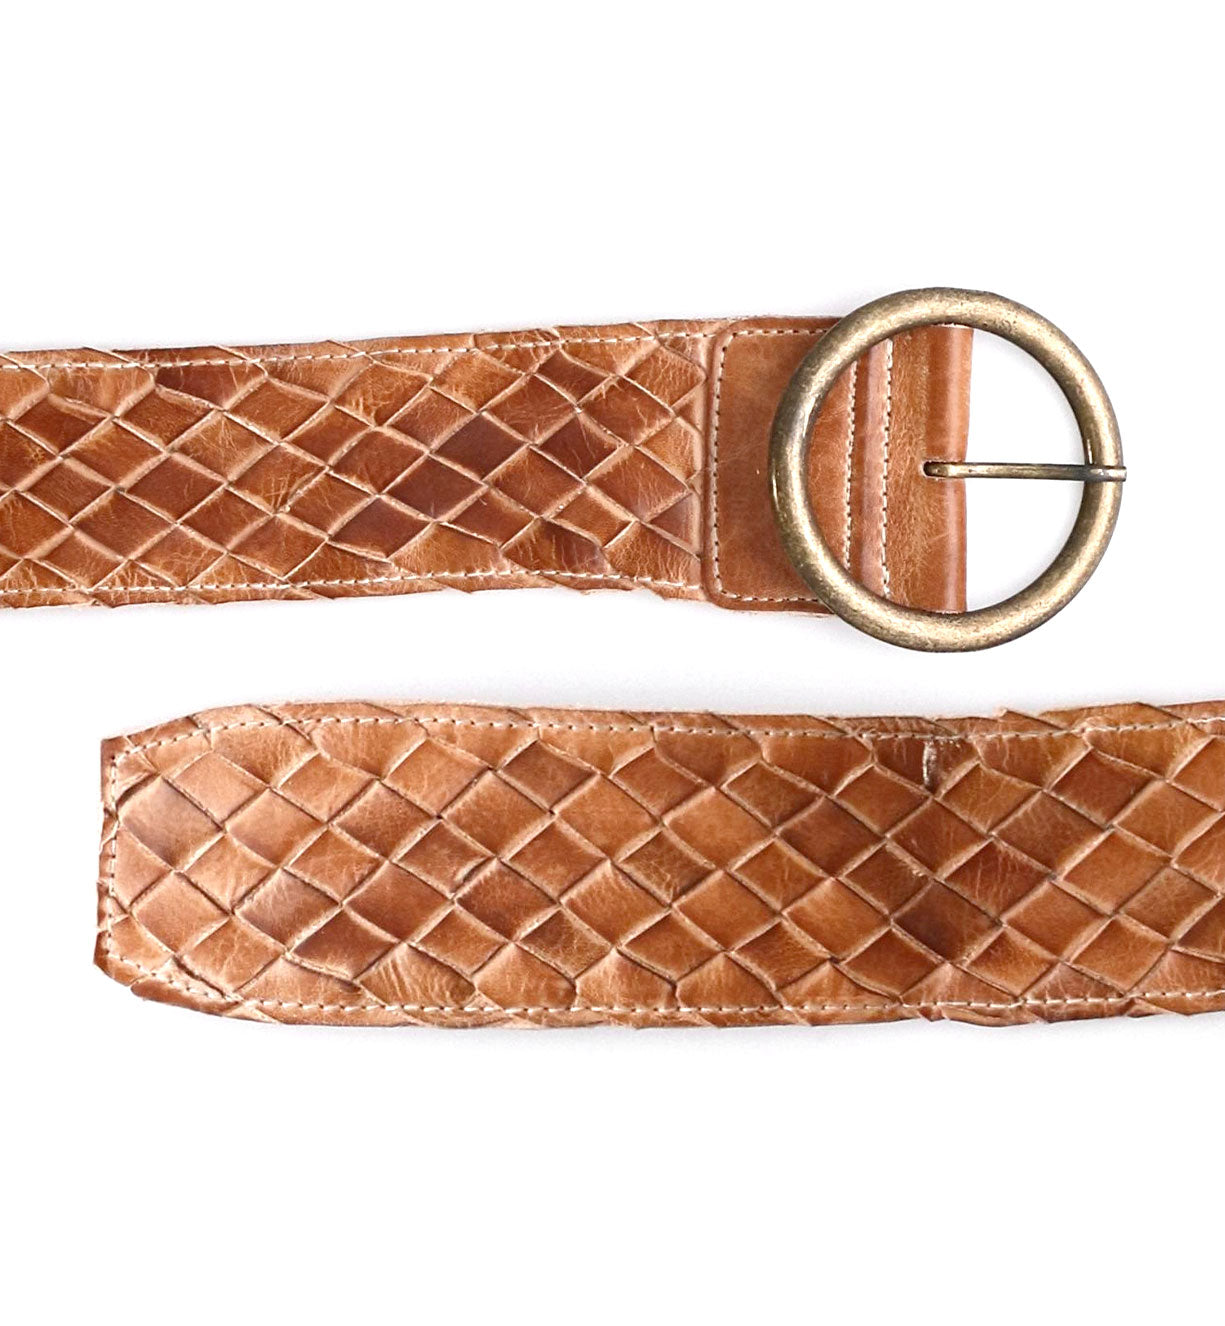 A Dreamweaver woven leather belt with a metal buckle, by Bed Stu.